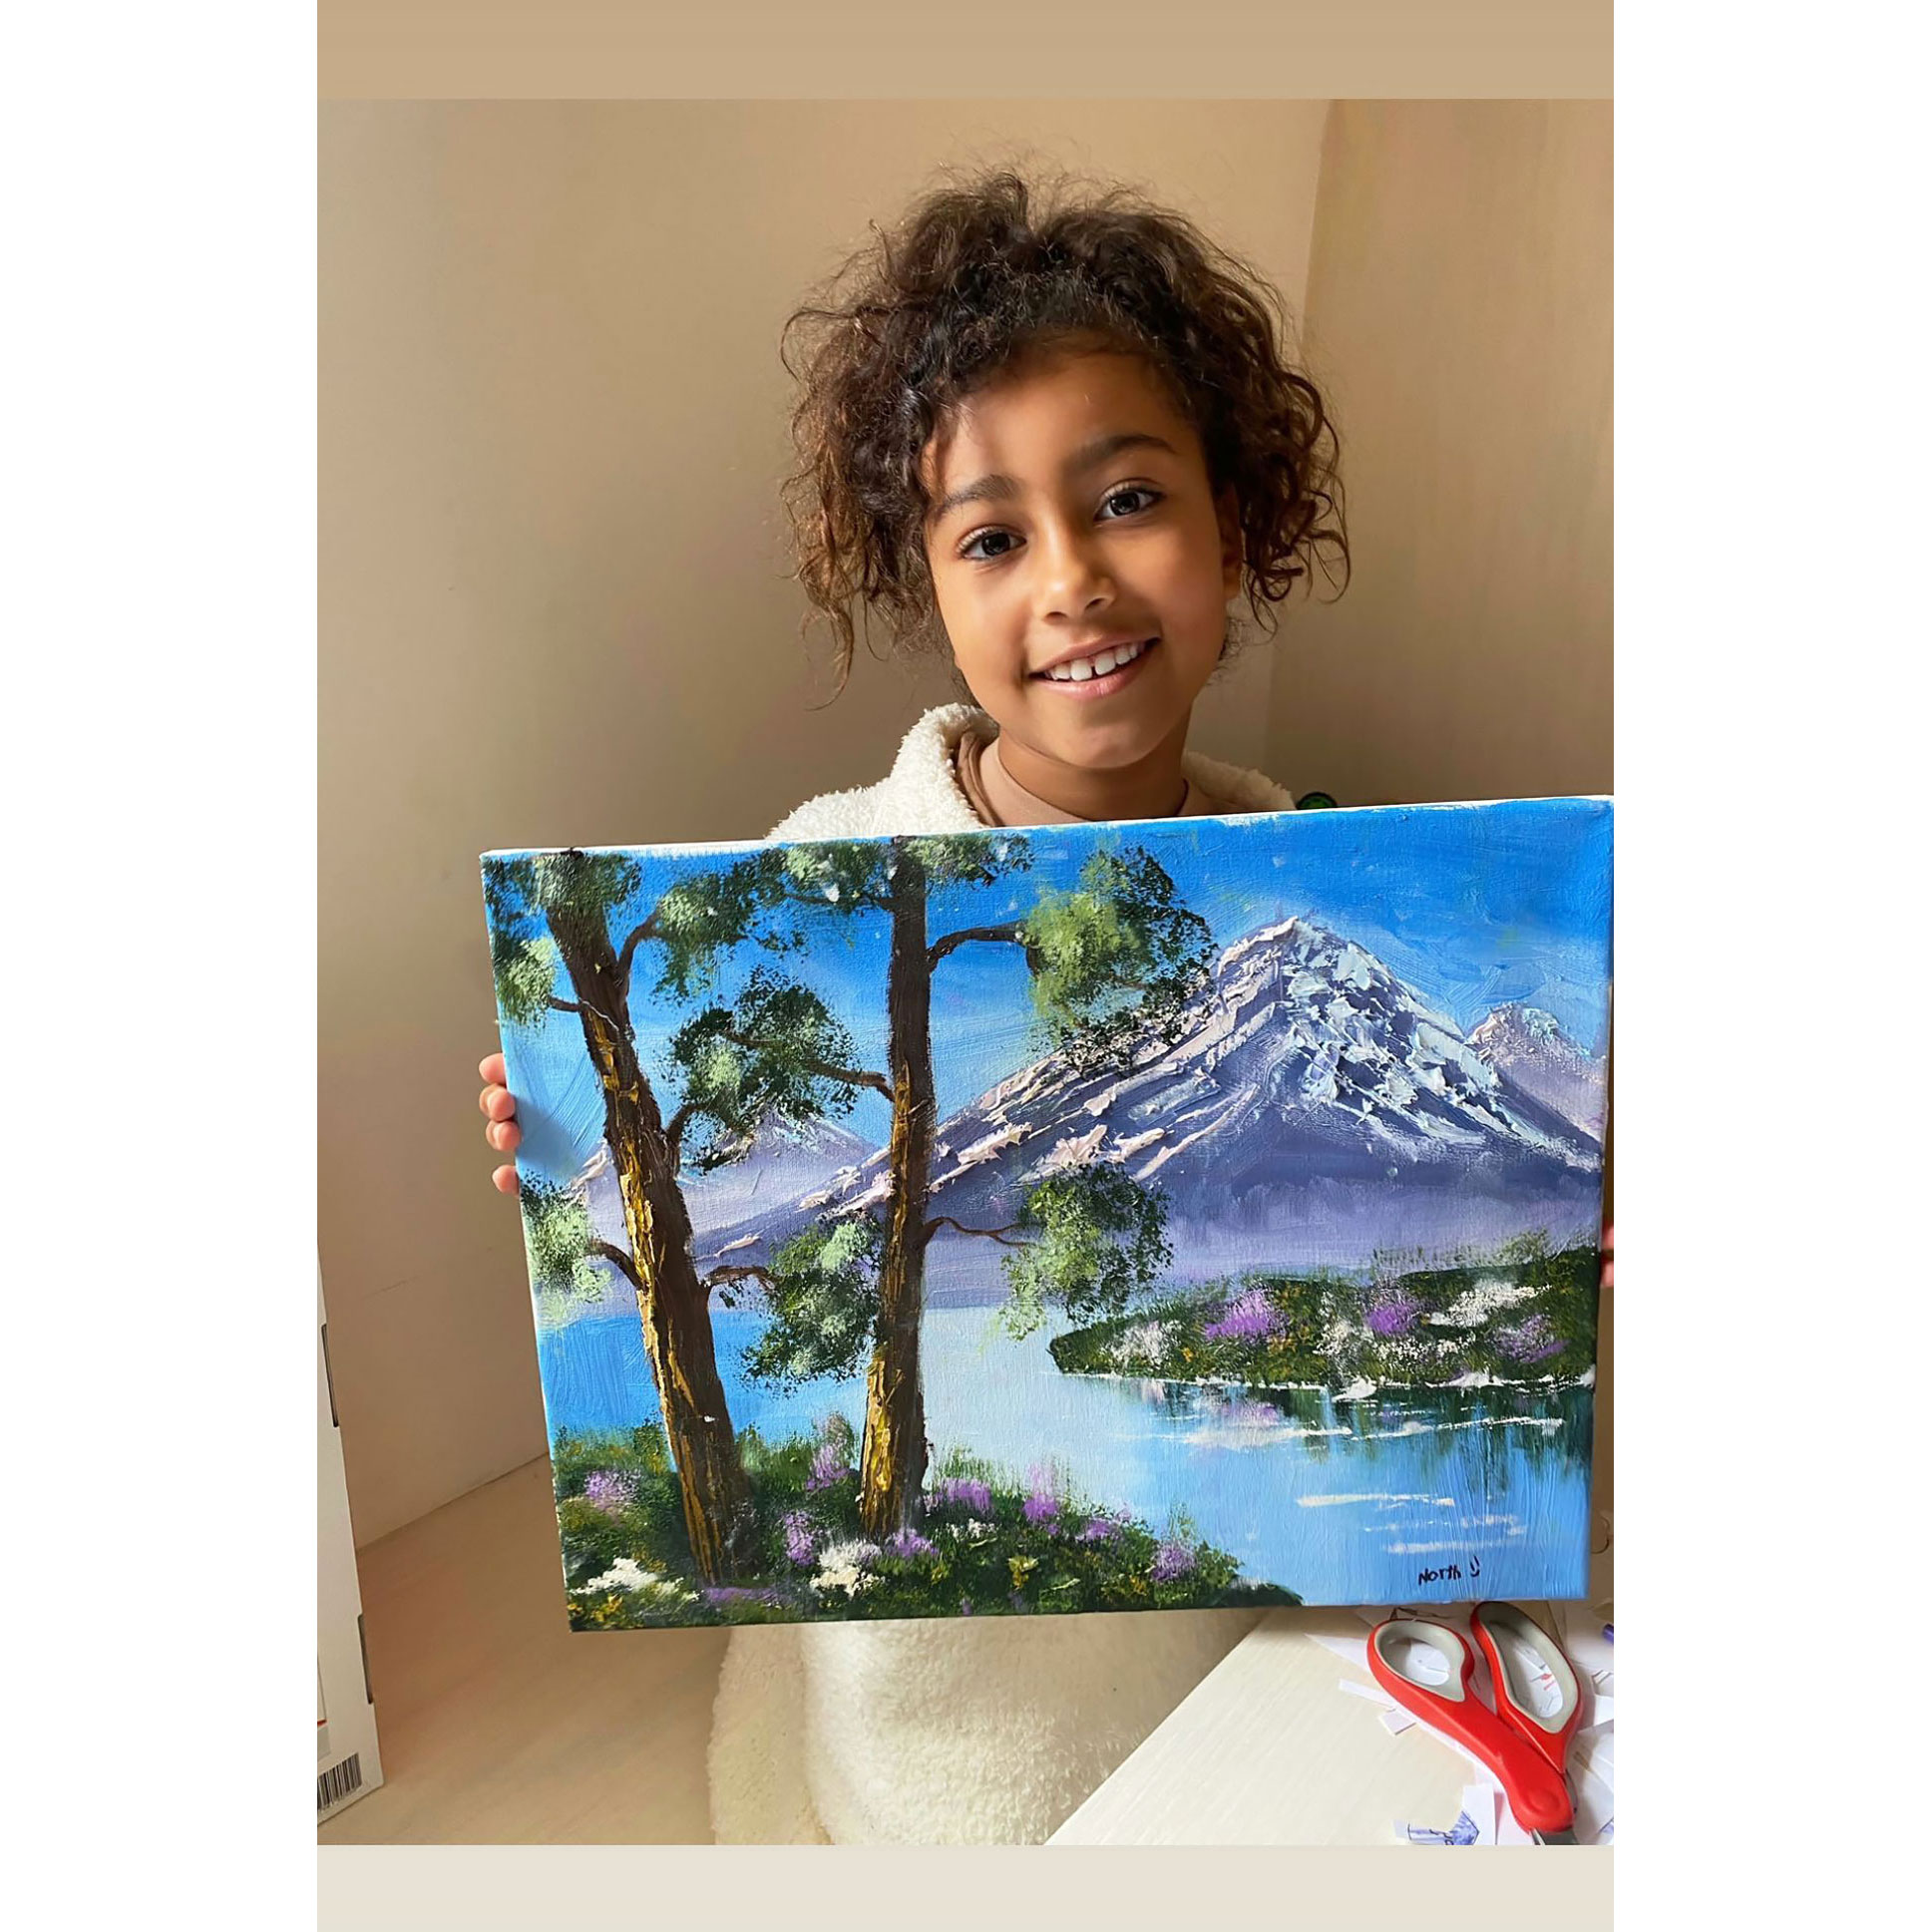 North West Scores Invite To Bob Ross Museum After Viral Painting